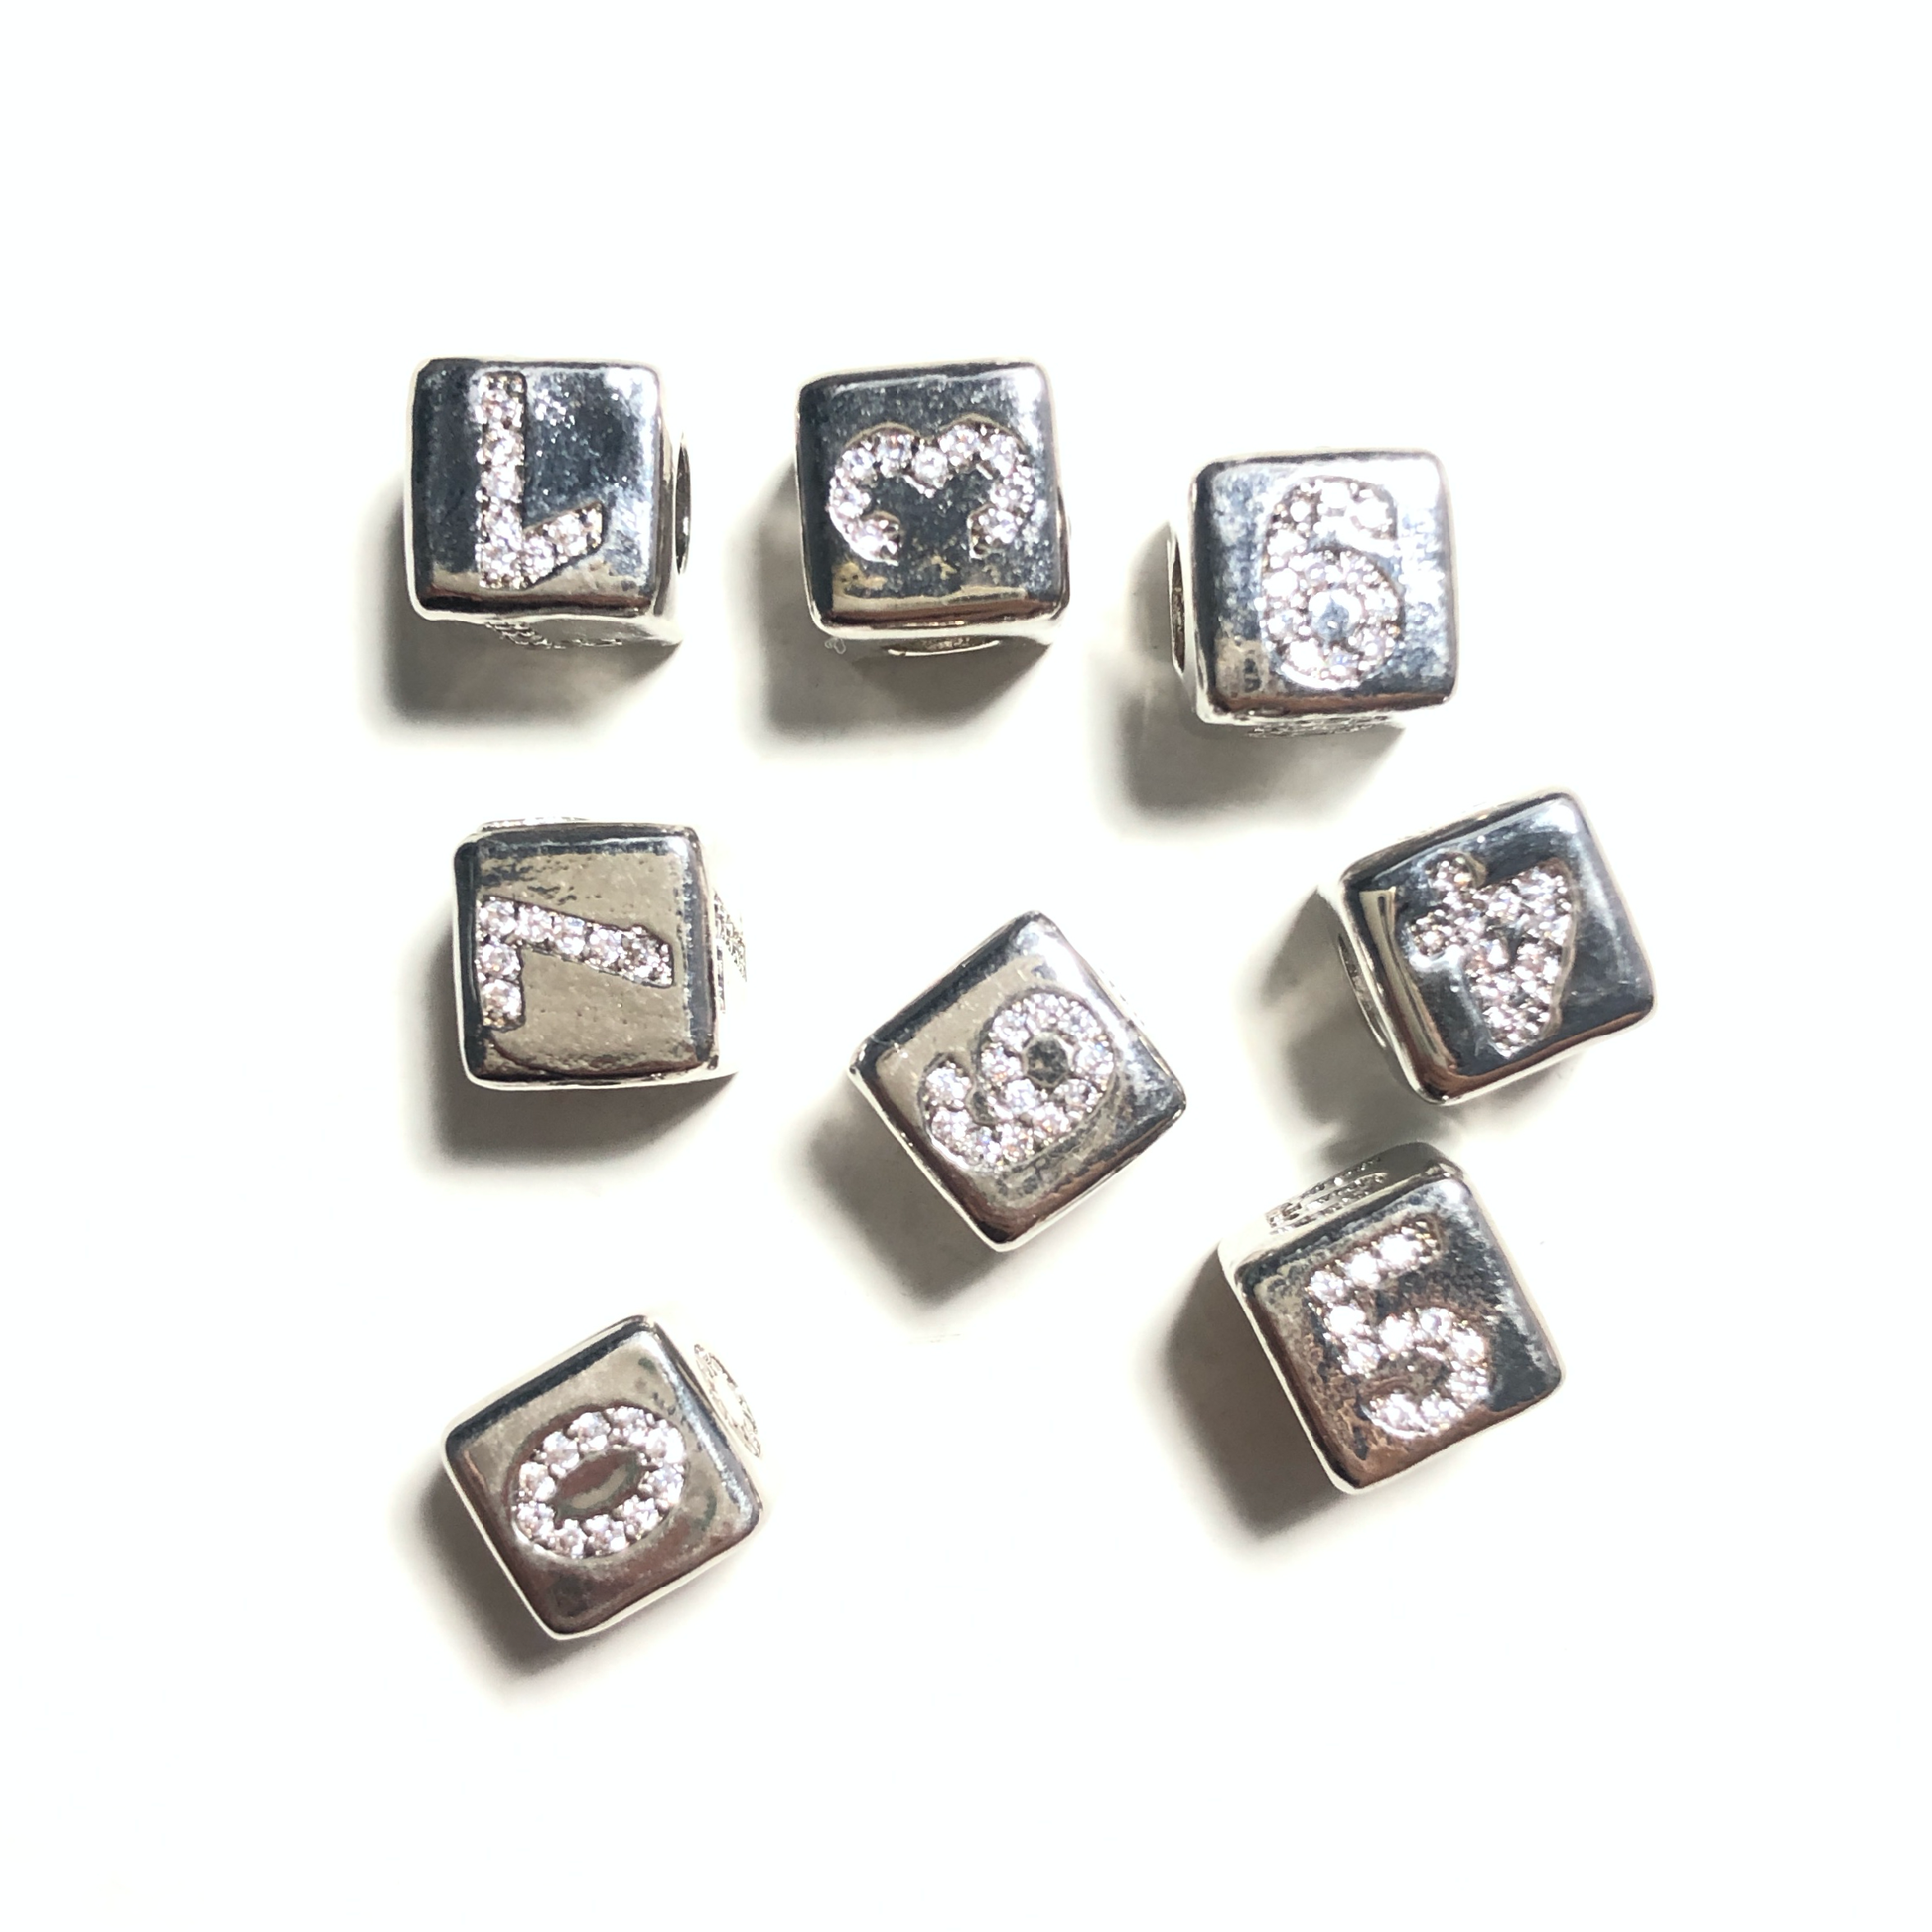 10pcs/lot 7.6mm CZ Paved Number Cubic Spacers-Silver CZ Paved Spacers Cubic Beads Initials & Numbers Charms Beads Beyond